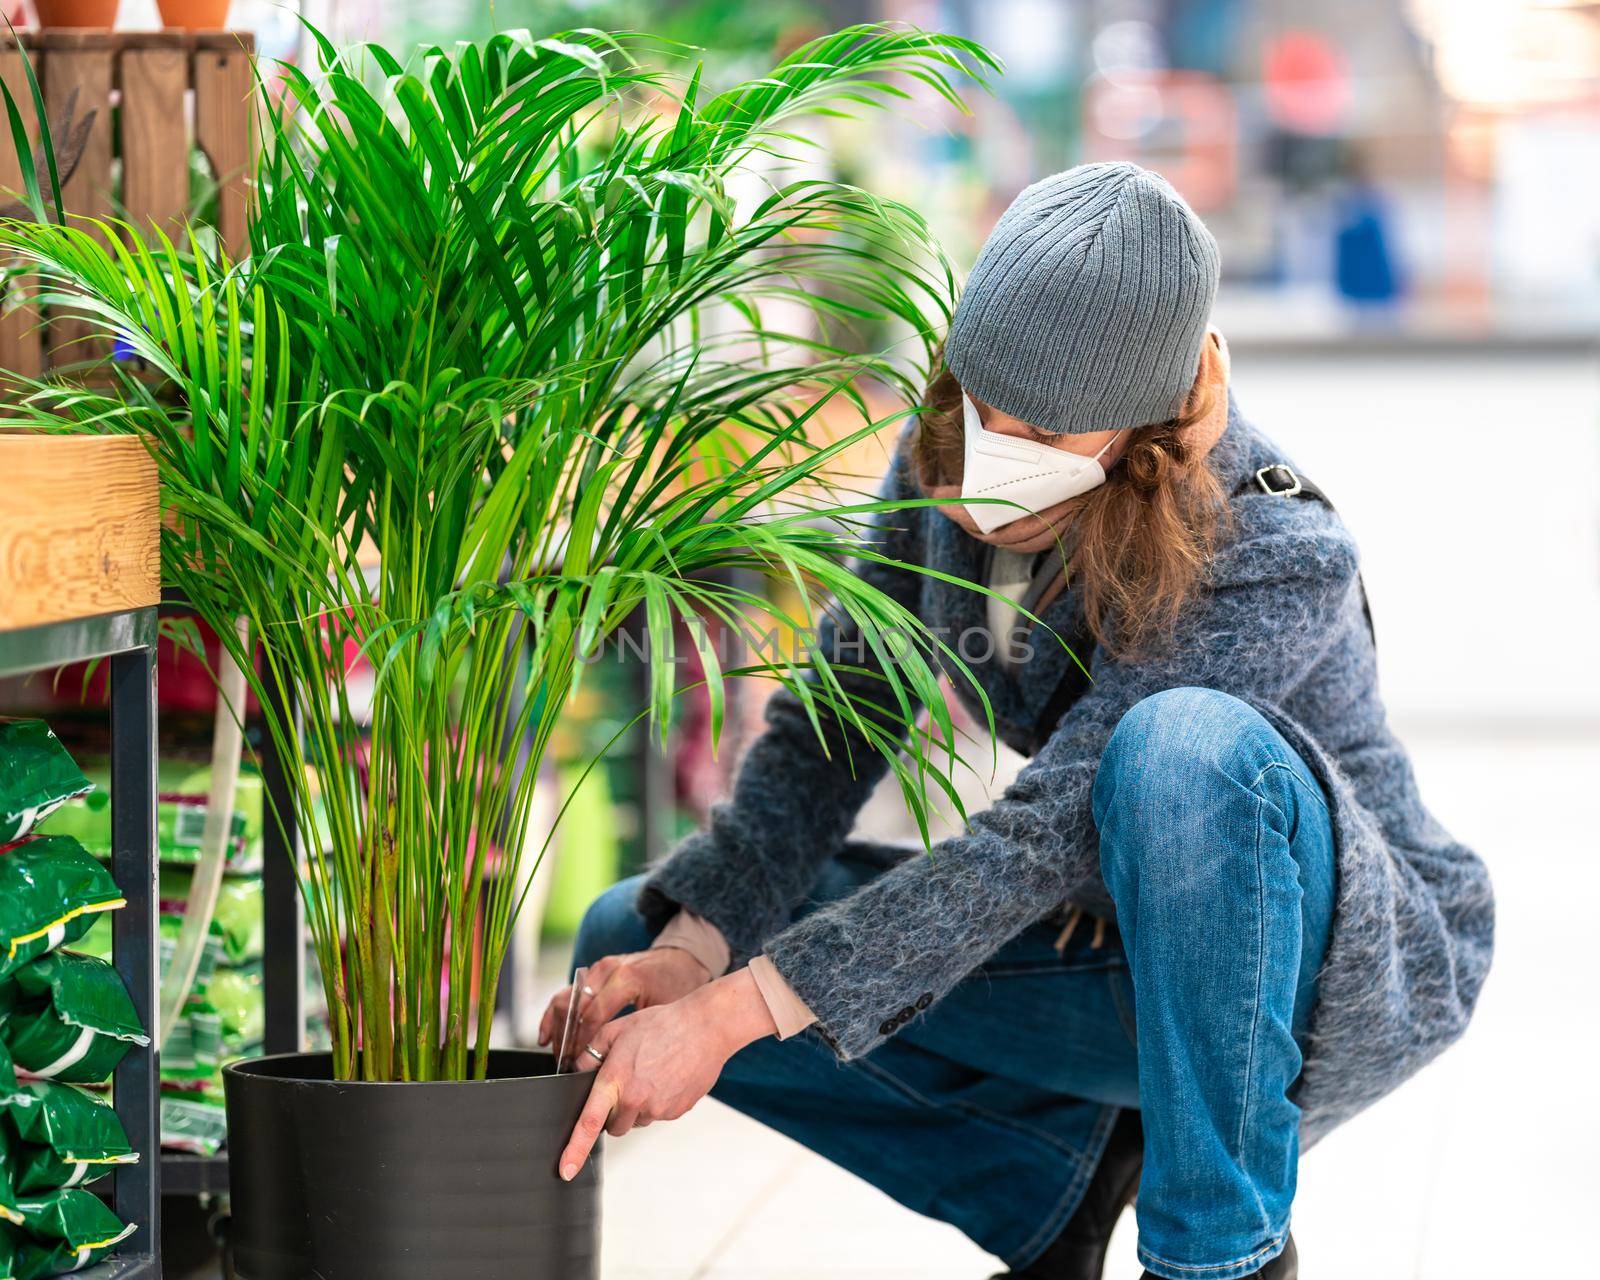 buying plants in a flowerpot in the garden center by Edophoto